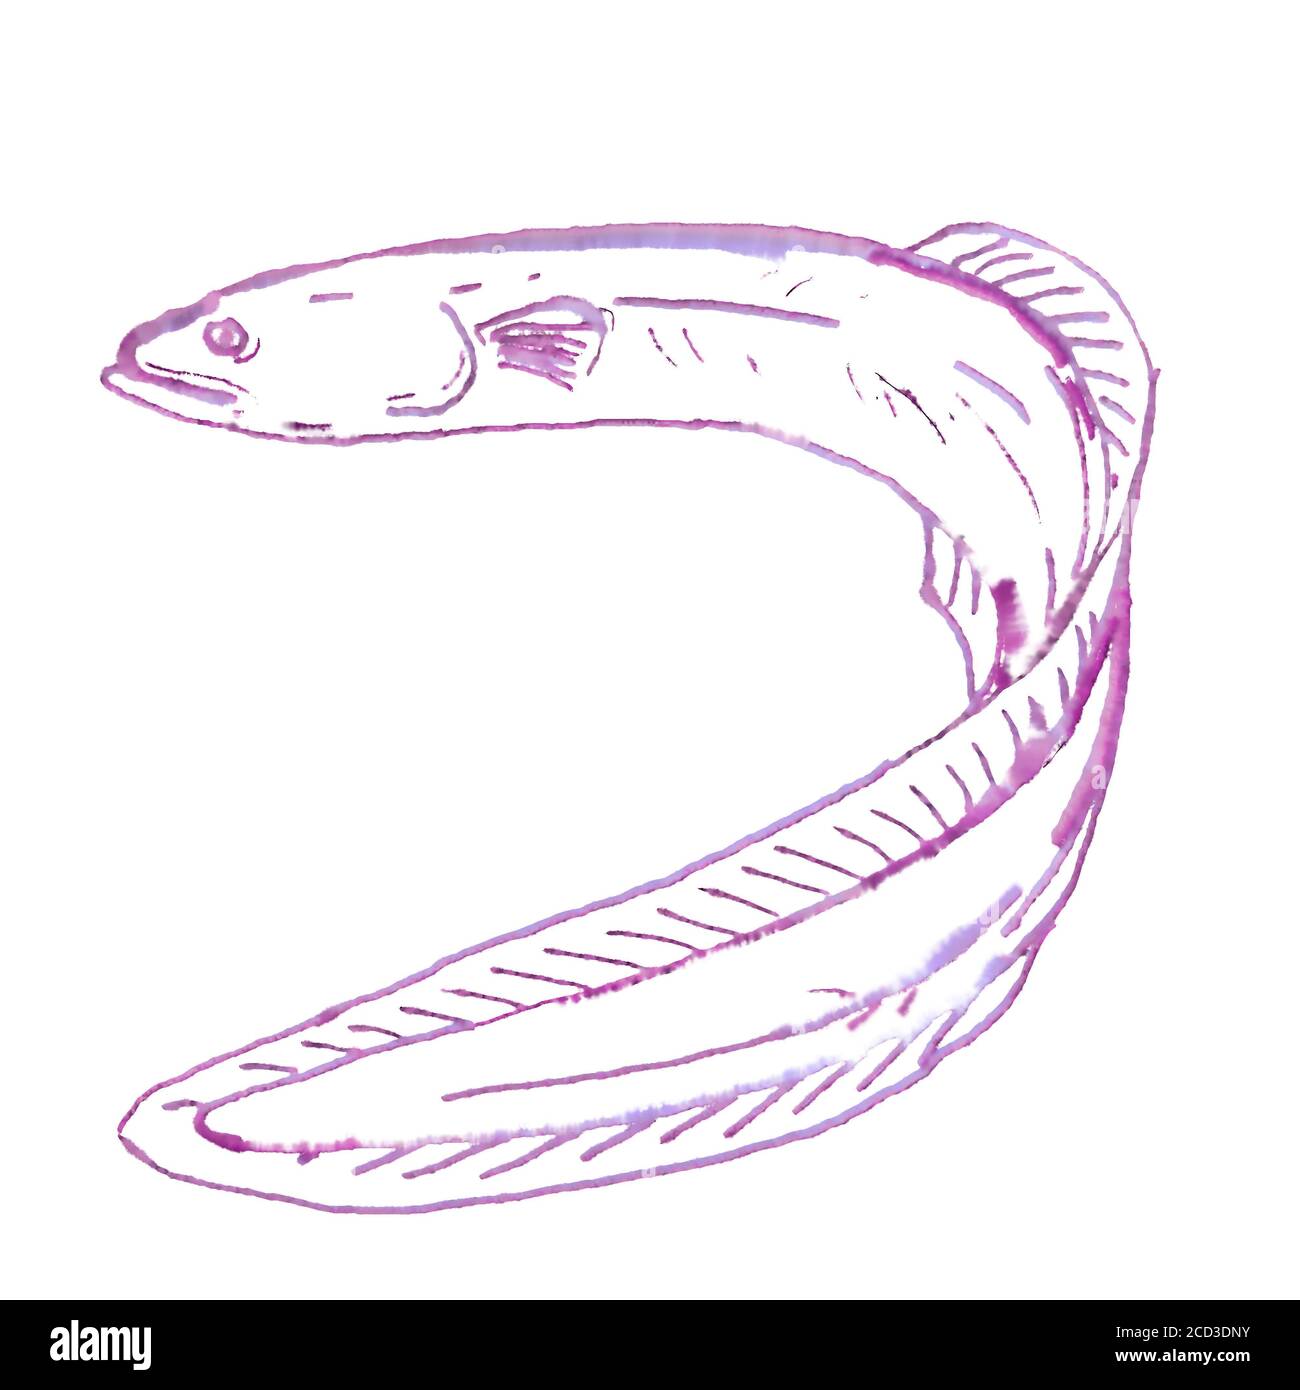 American eel Cut Out Stock Images & Pictures - Alamy